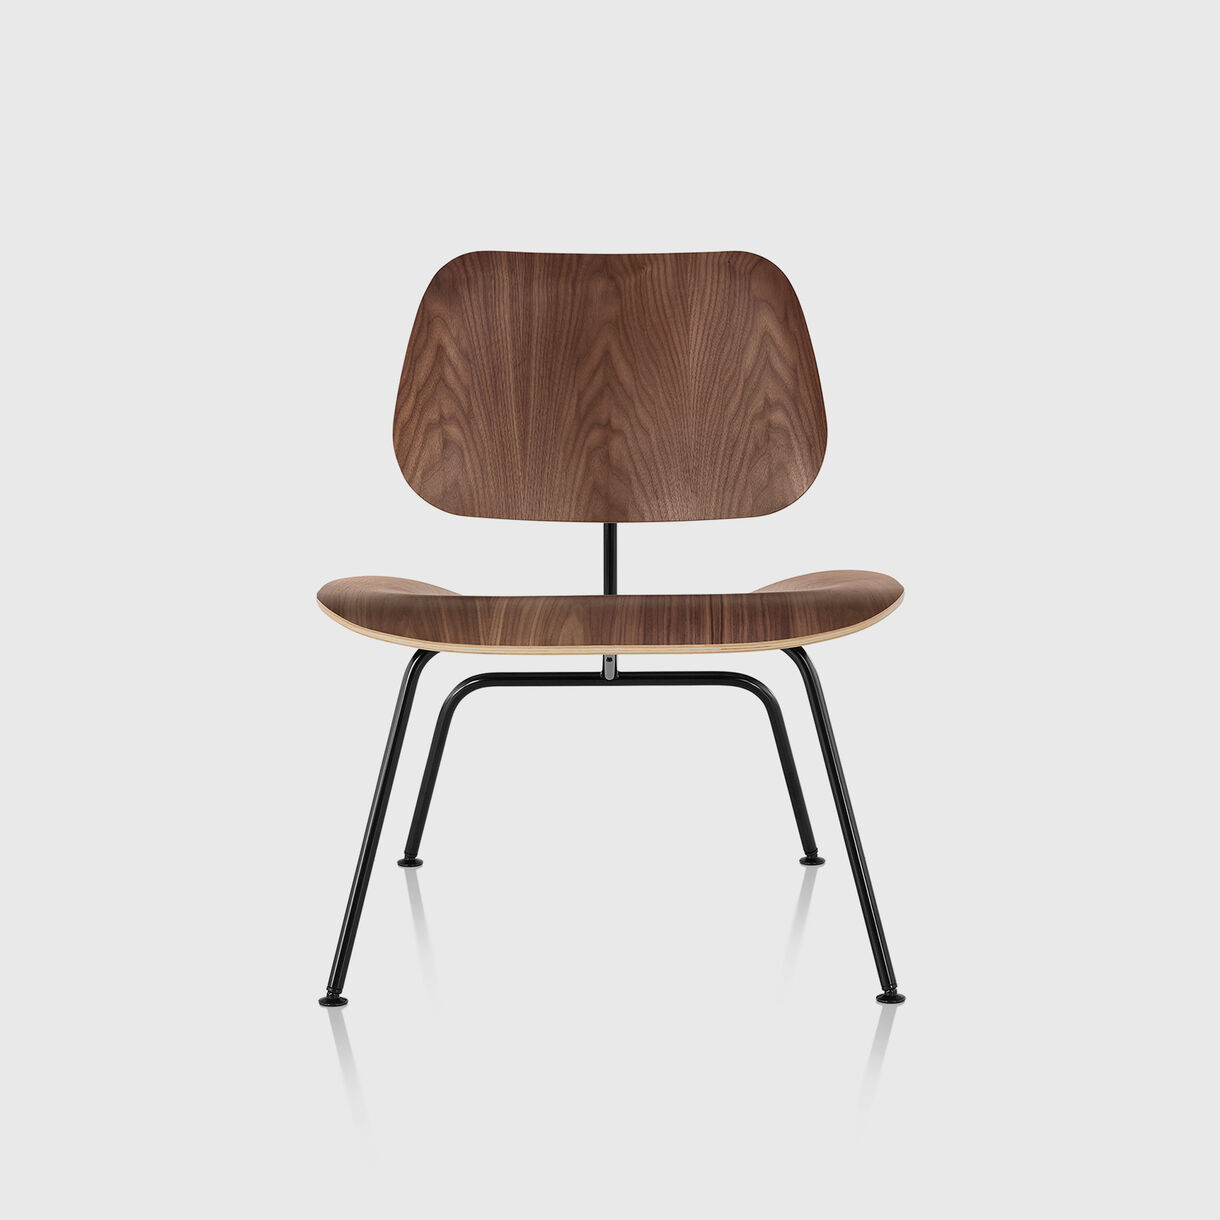 Eames Moulded Plywood Lounge Chair, Metal Base, Walnut & Black